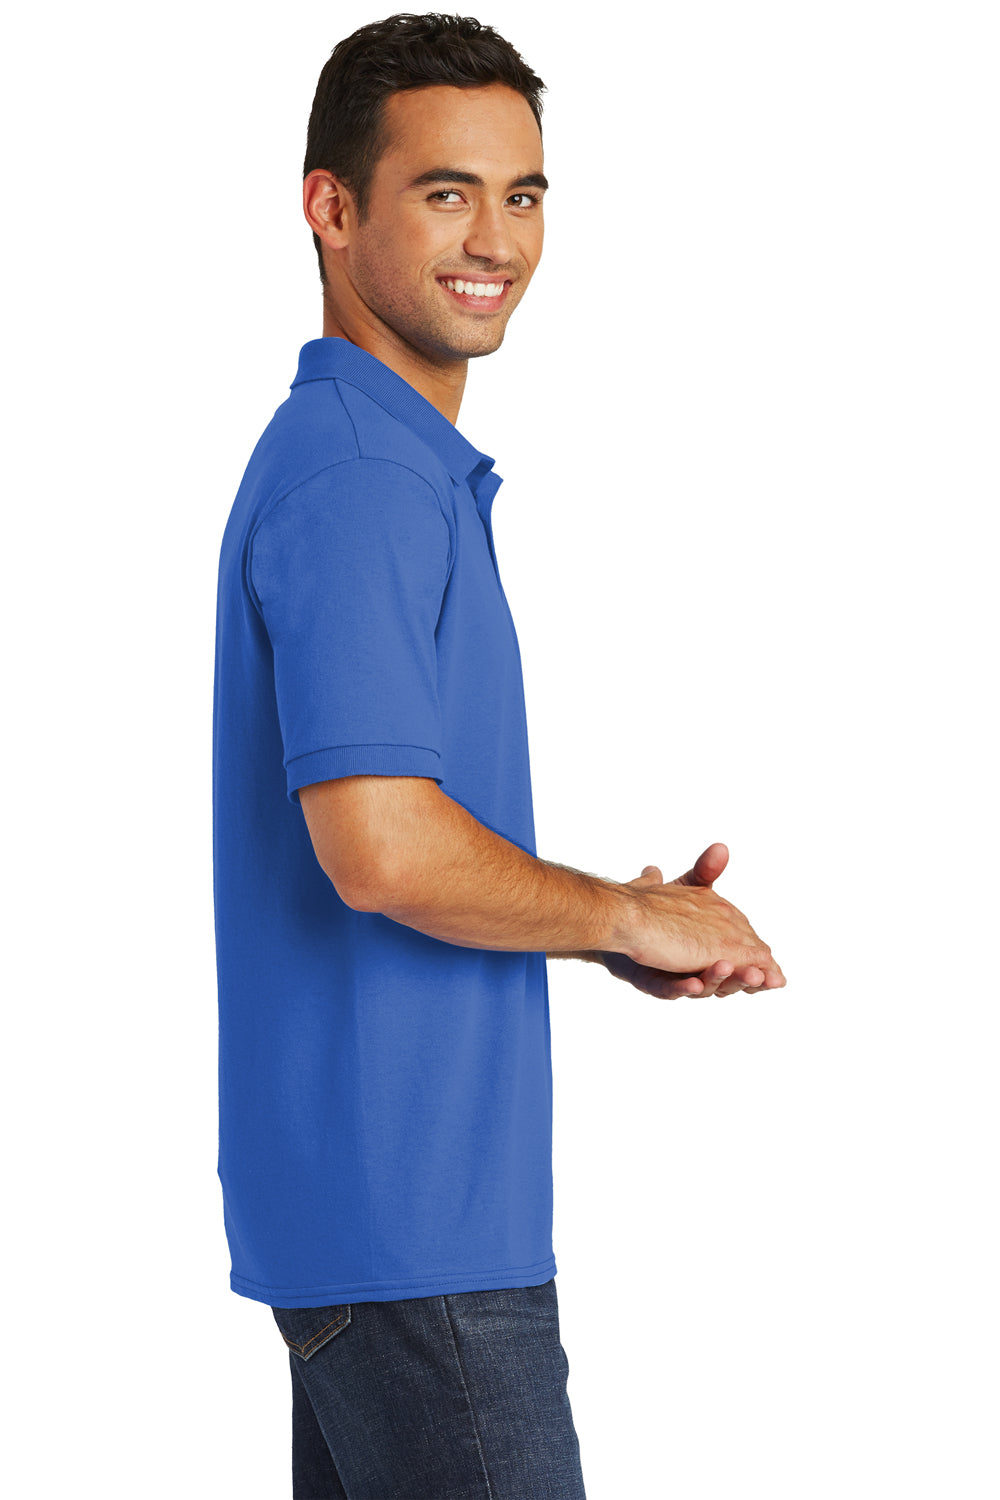 Port & Company KP55 Mens Core Stain Resistant Short Sleeve Polo Shirt Royal Blue Side